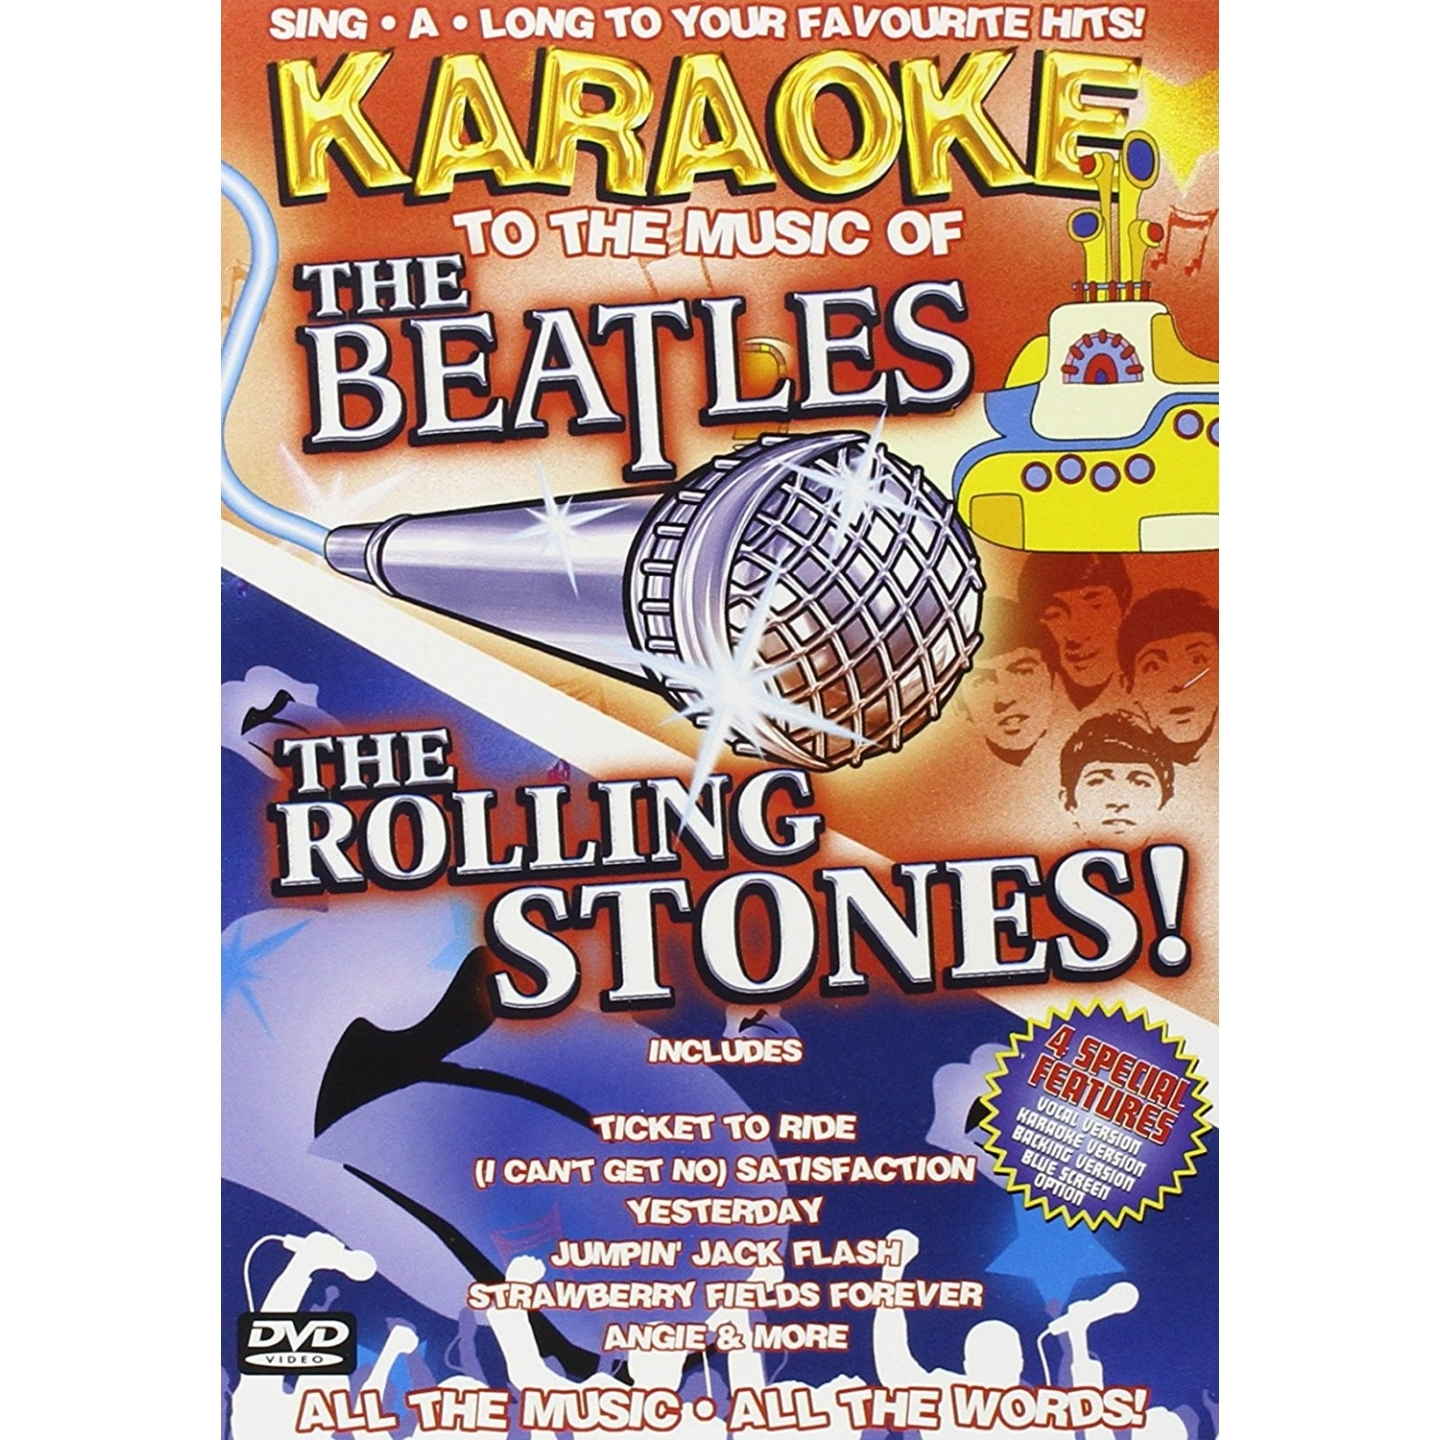 KARAOKE TO THE MUSIC OF THE BEATLES & STONES